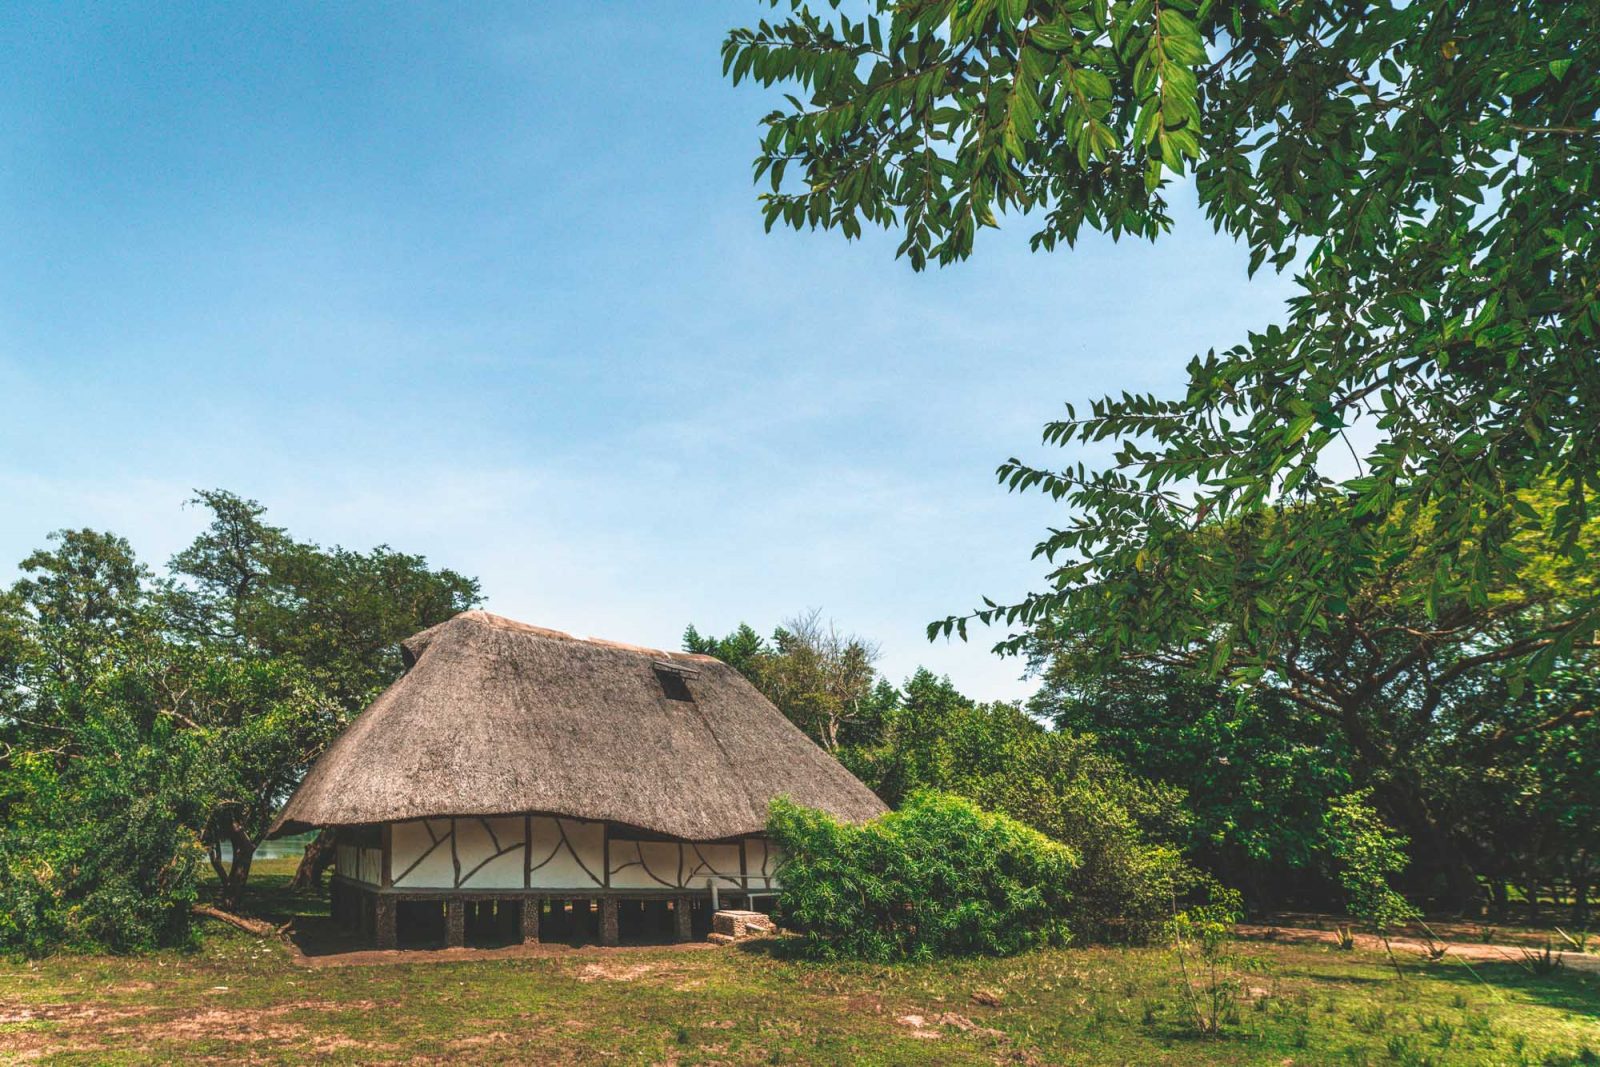 Tents at Baker's Lodge, Murchison Falls National Park